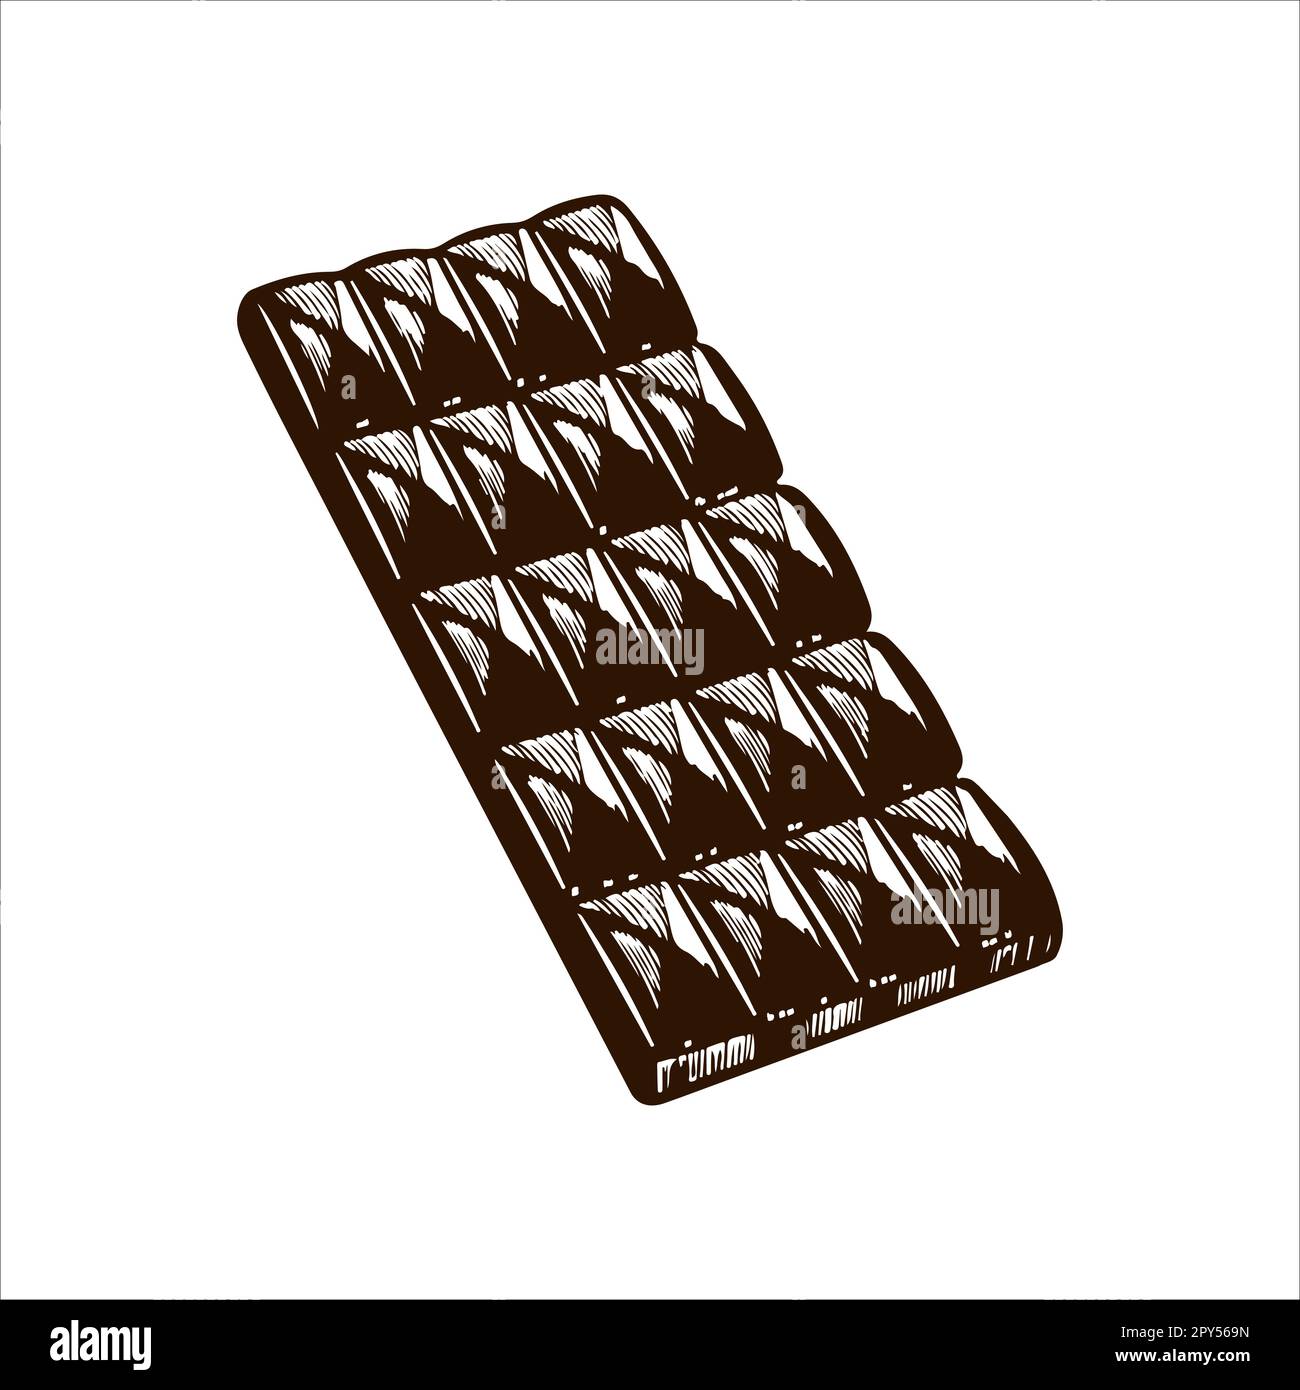 Vector illustration of a chocolate bar. Wrapped in packaging bar with a cocoa beans print, in unwrapped foil, with large chunks, whole block. Vintage Stock Vector